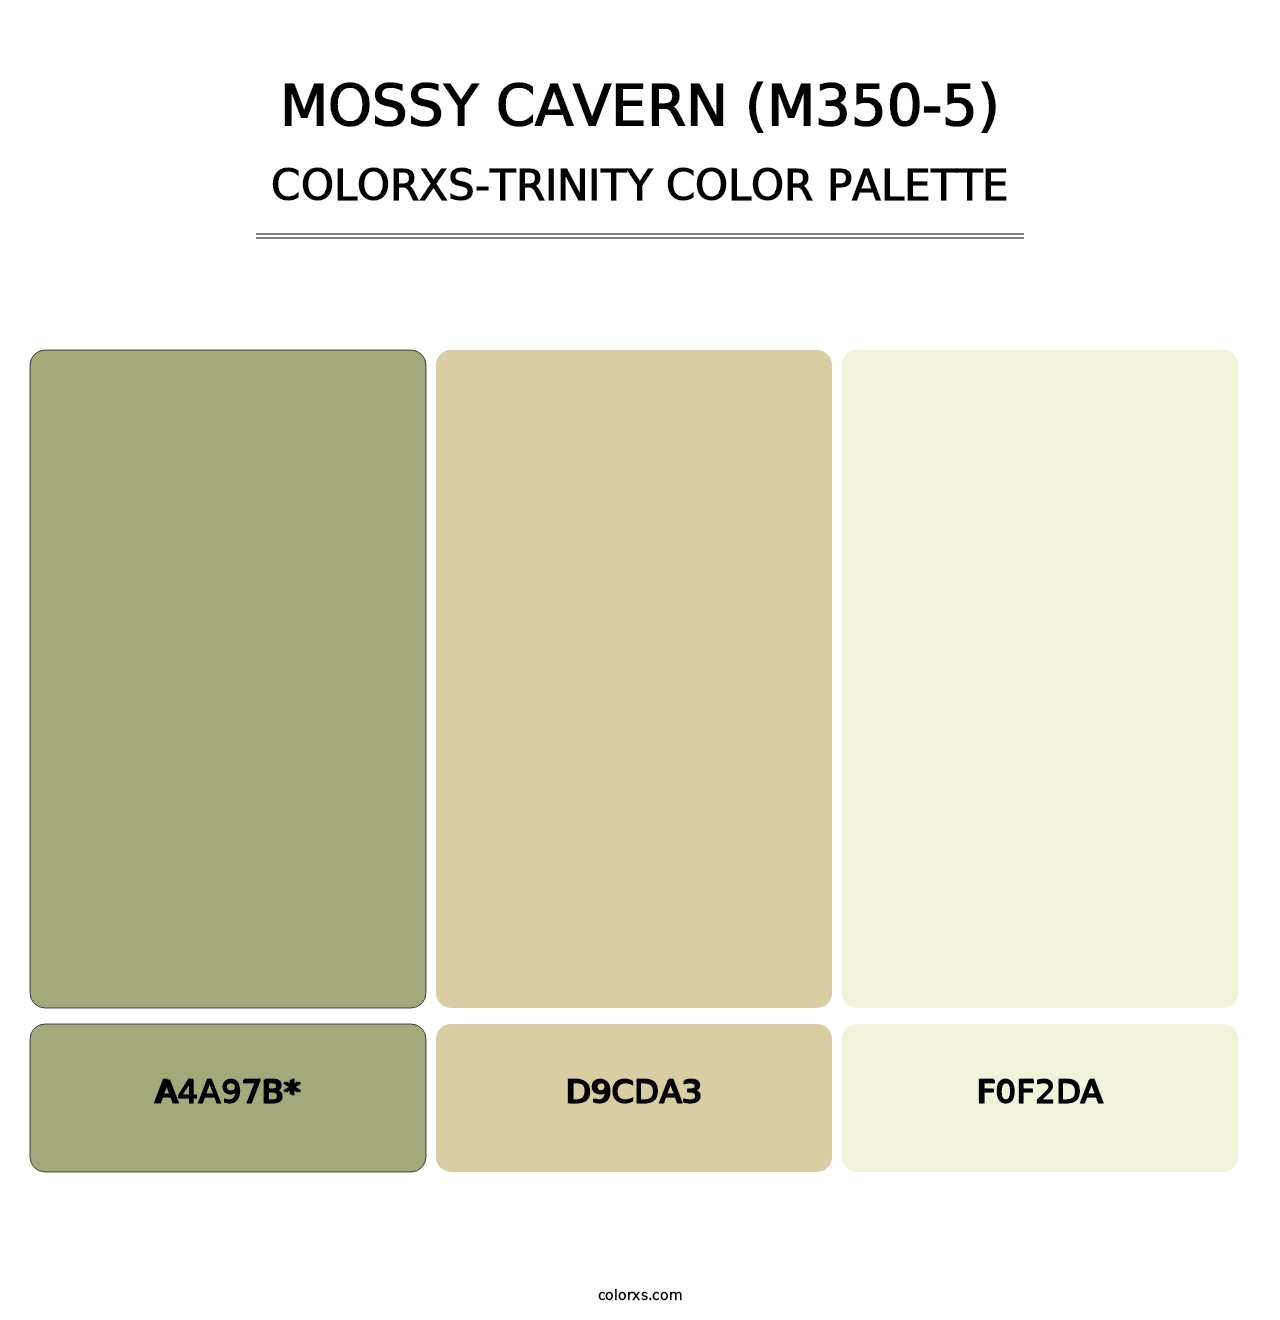 Mossy Cavern (M350-5) - Colorxs Trinity Palette